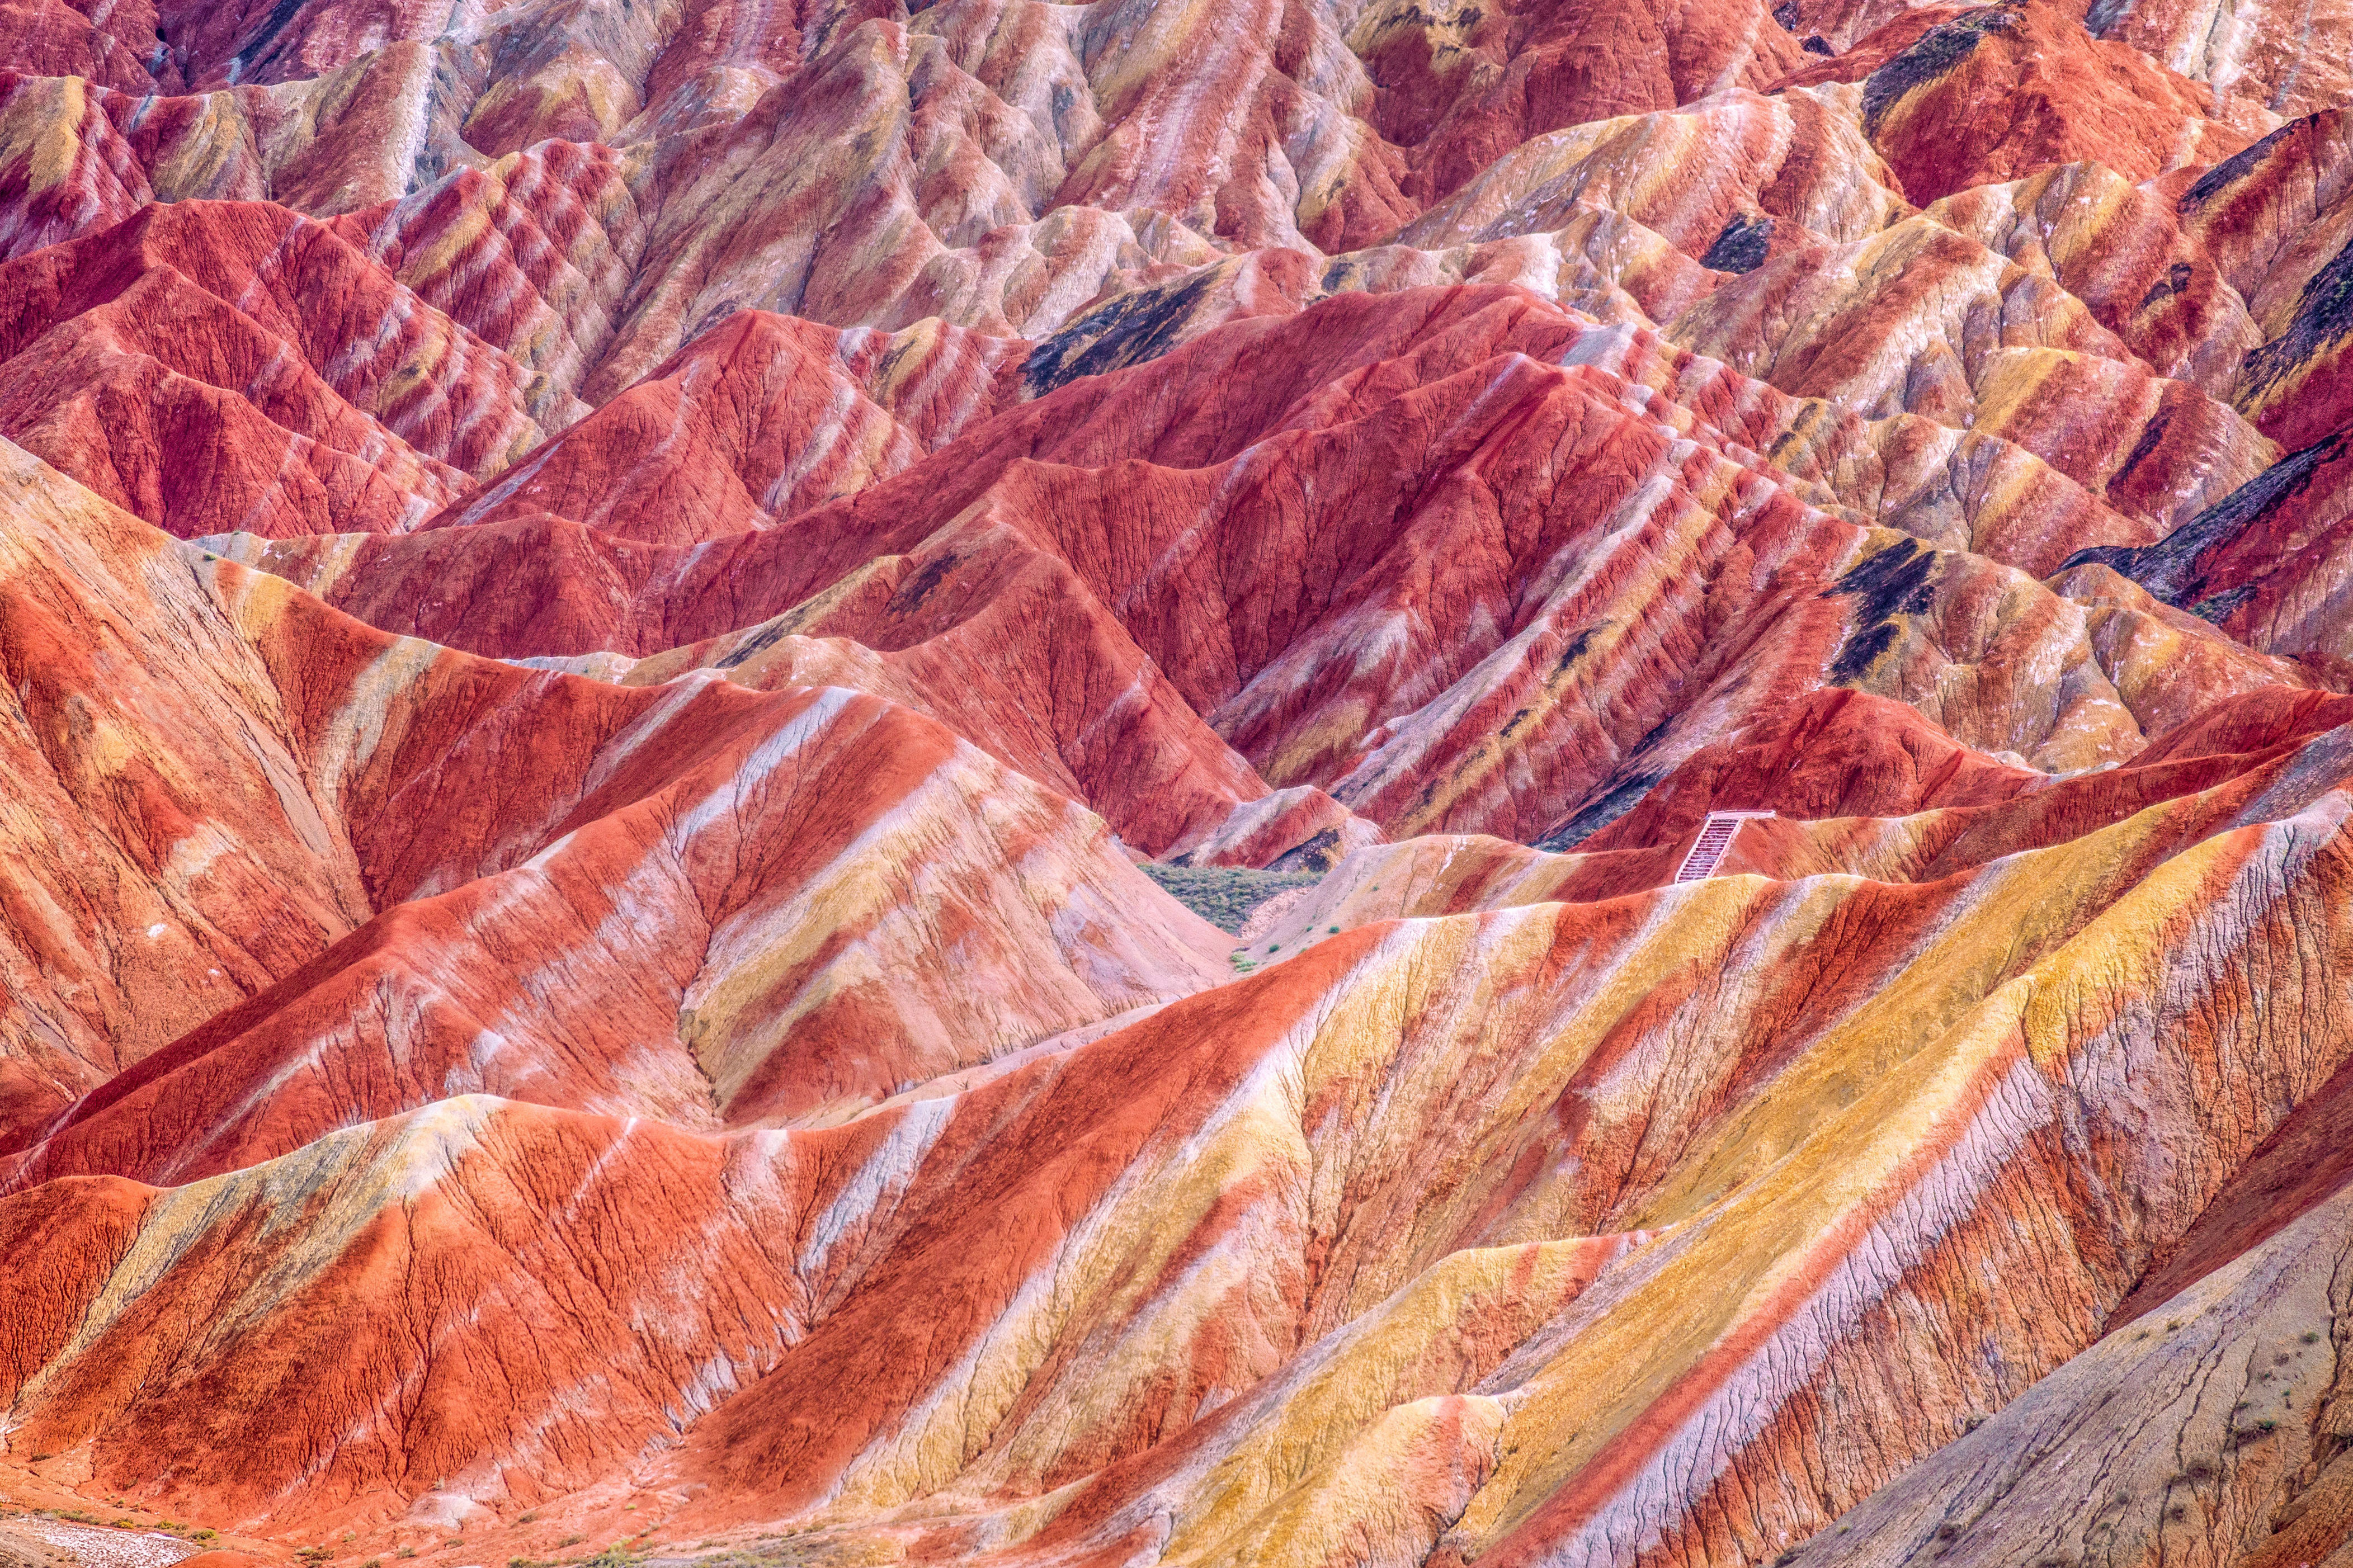 <p>These striped, technicolor mountains are Mother Nature’s answer to Photoshop. Red sandstone and mineral deposits have been building up in China’s Zhangye National Geopark (formerly Zhangye Danxia Geopark) for more than 20 million years, causing the surreal layered effect.</p> <p><strong>Get the shot:</strong> There are a couple of viewing platforms surrounding the geopark. The highest platform comes at the end of a rather grueling climb up hundreds of steps, but the trek allows you to take in panoramic views of the rainbow mountains (bonus points for sunset photos).</p>